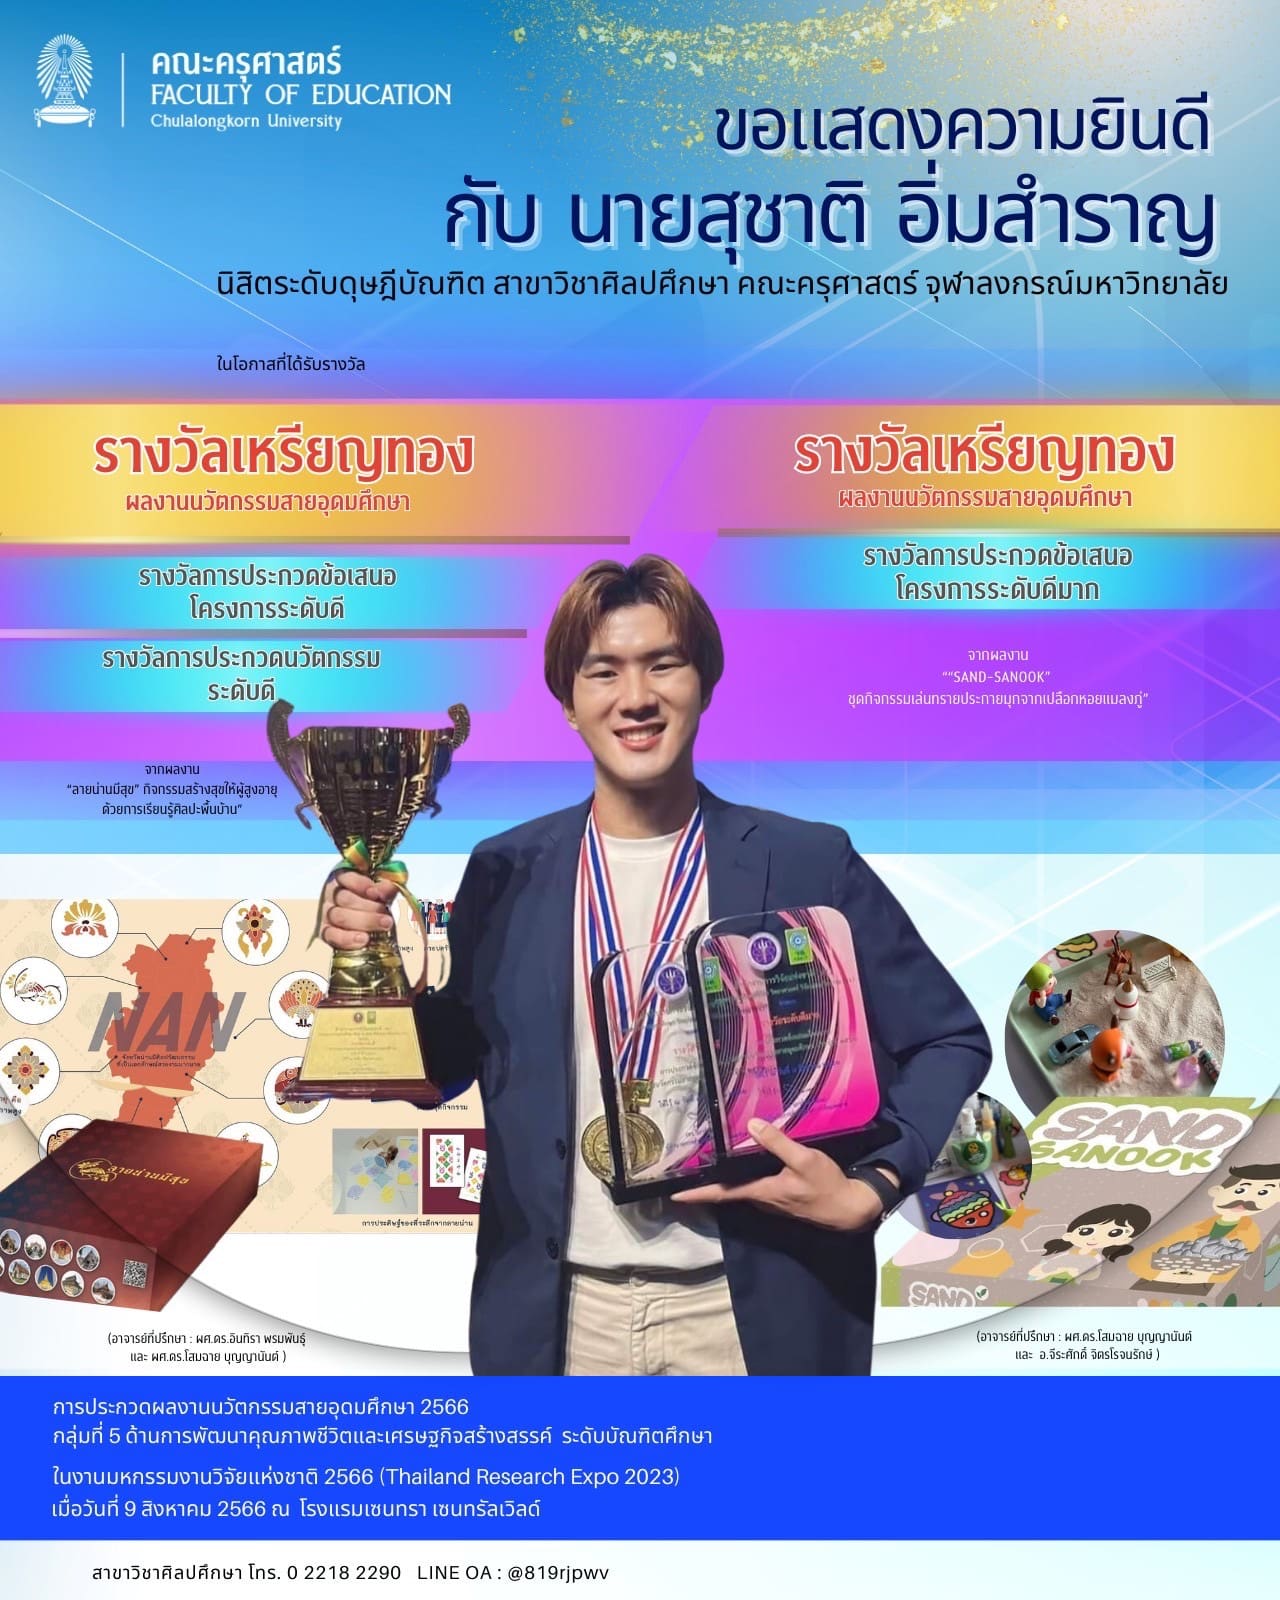 “Lai Nan Mee Suk”: an activity for the elderly to enjoy themselves with folk arts & “Sand-Sanook”: a play kit featuring pearlescent sand from mussel shells by Mr. Suchart Imsamran